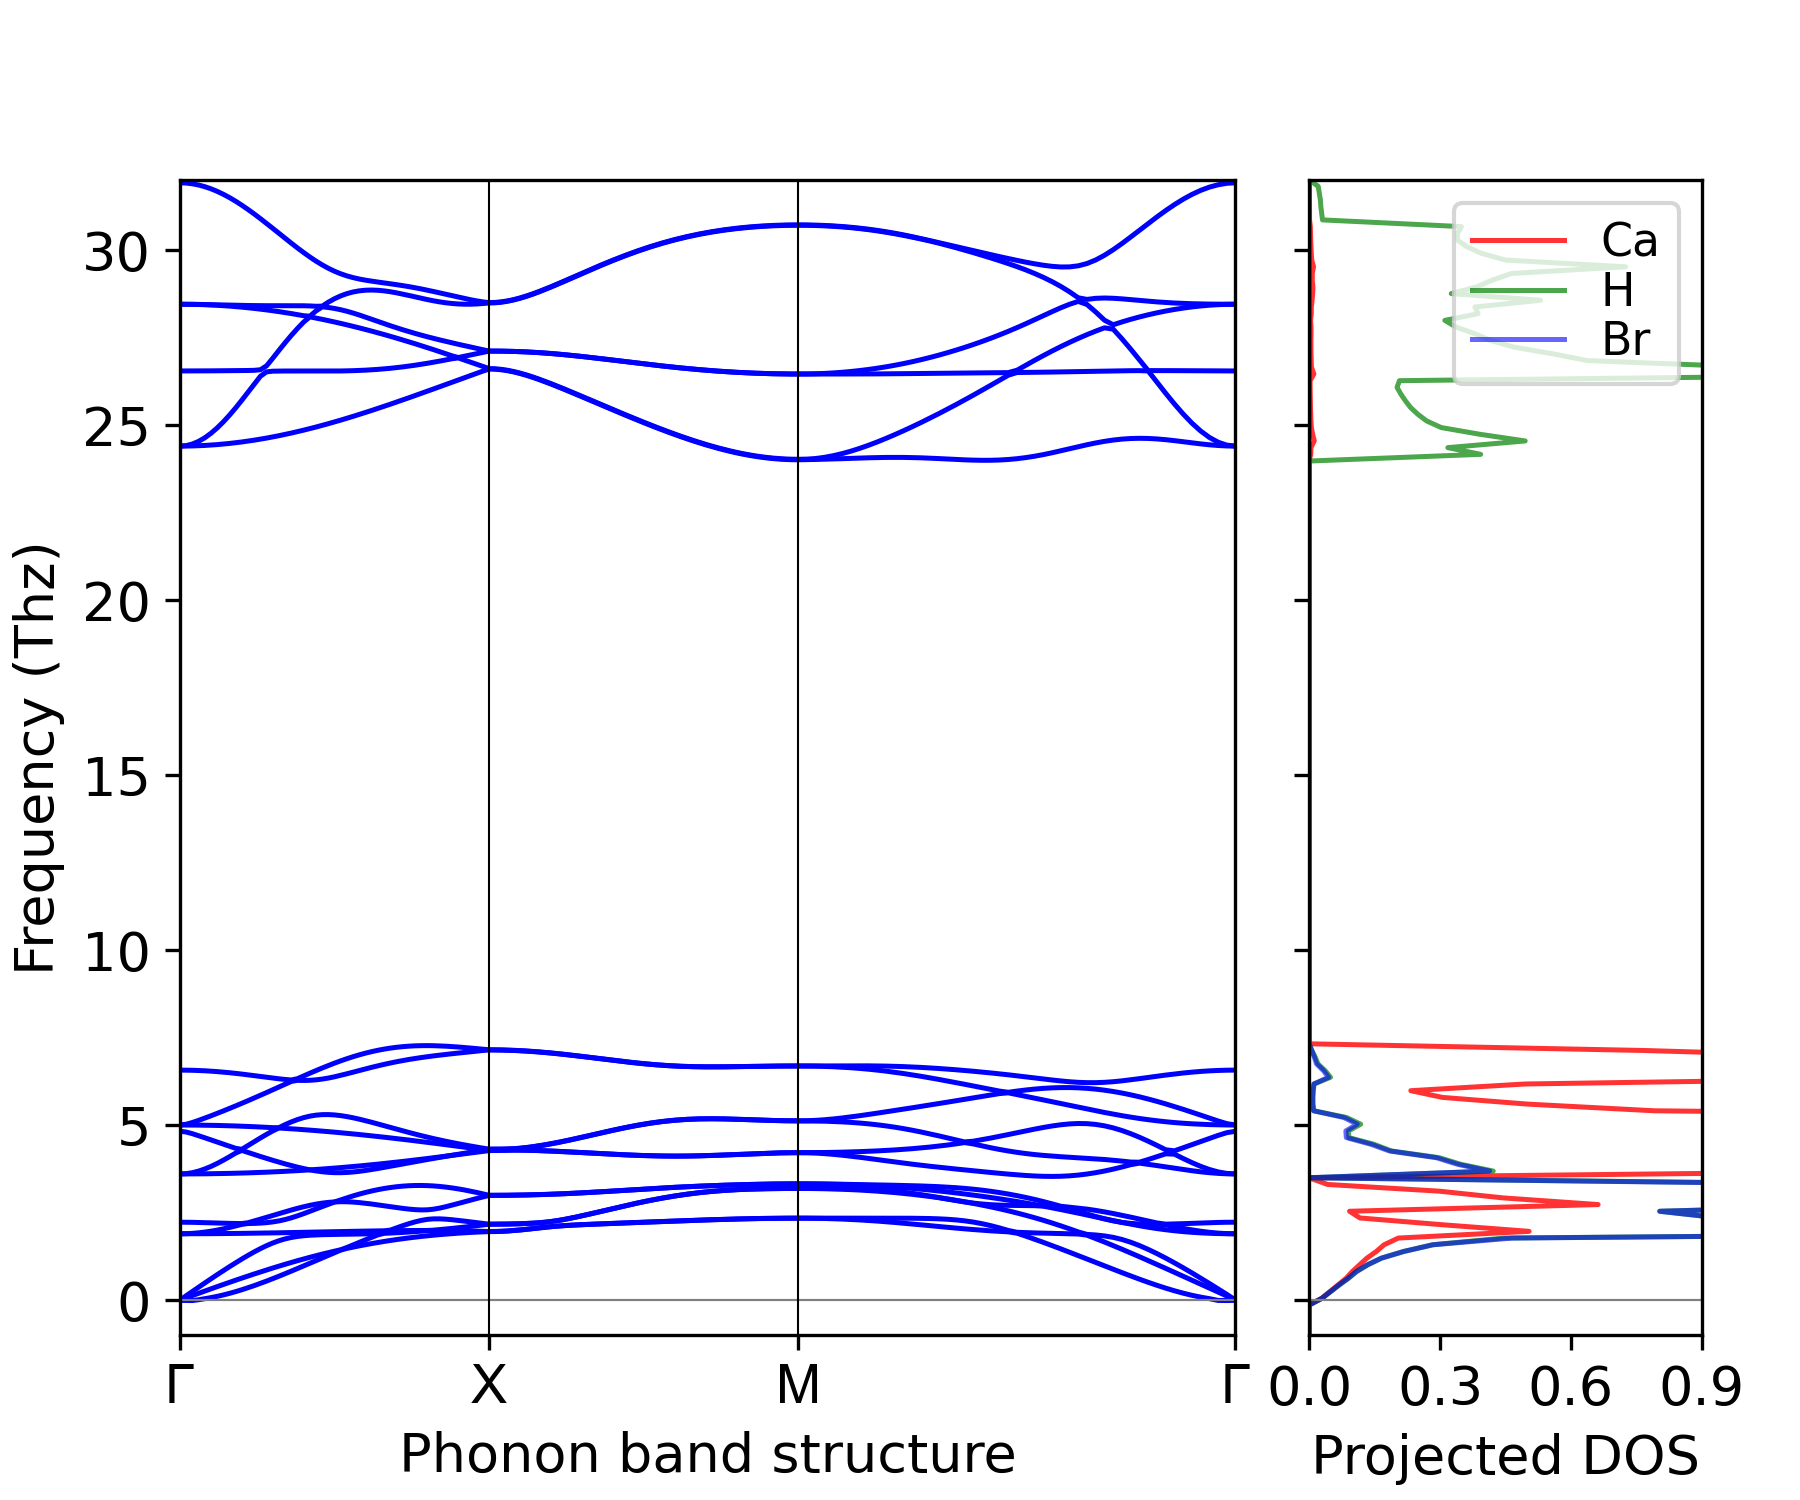 ../_images/phonon_BAND_LDOS-CaHBr_P4^nmm.png